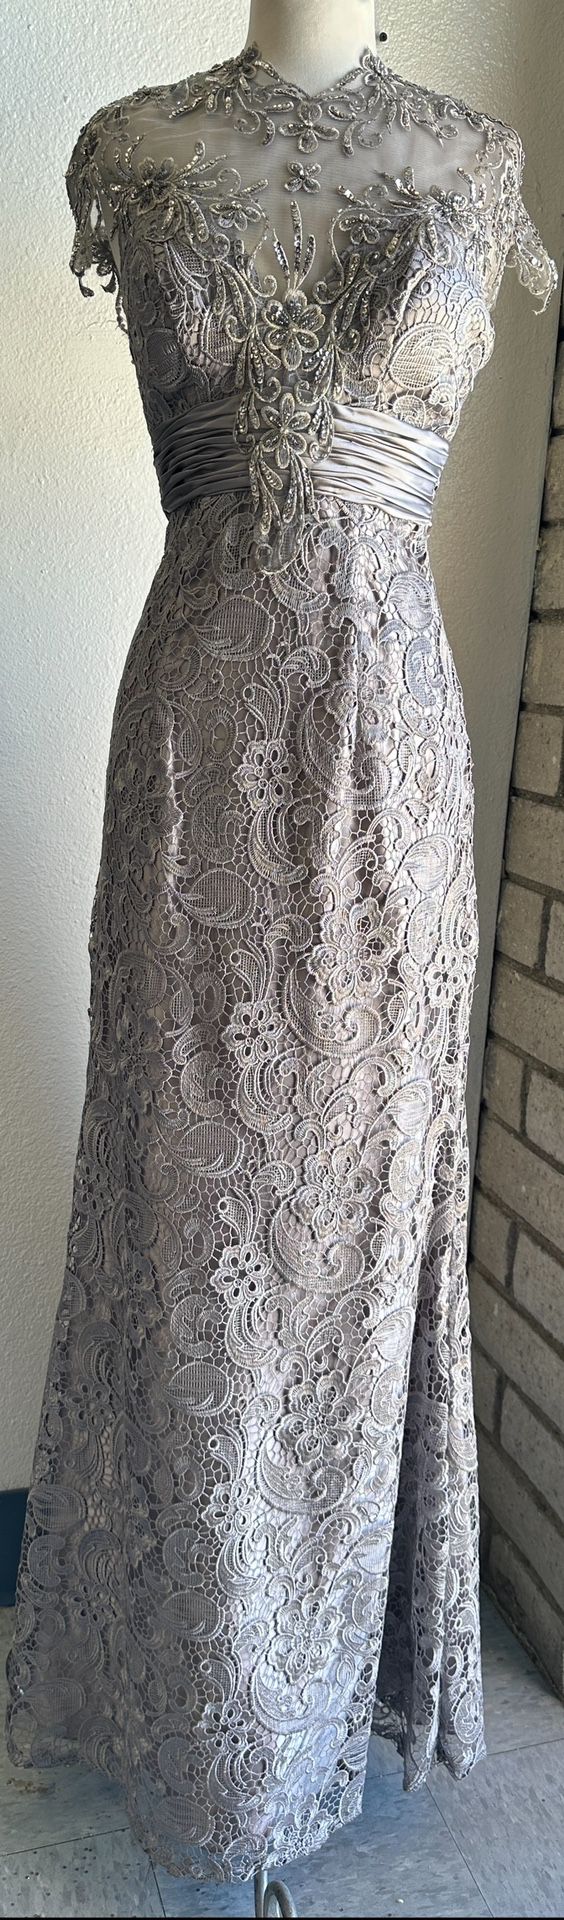 Prom Dress, Formal Dress, Lace, Gray, Extra-Small